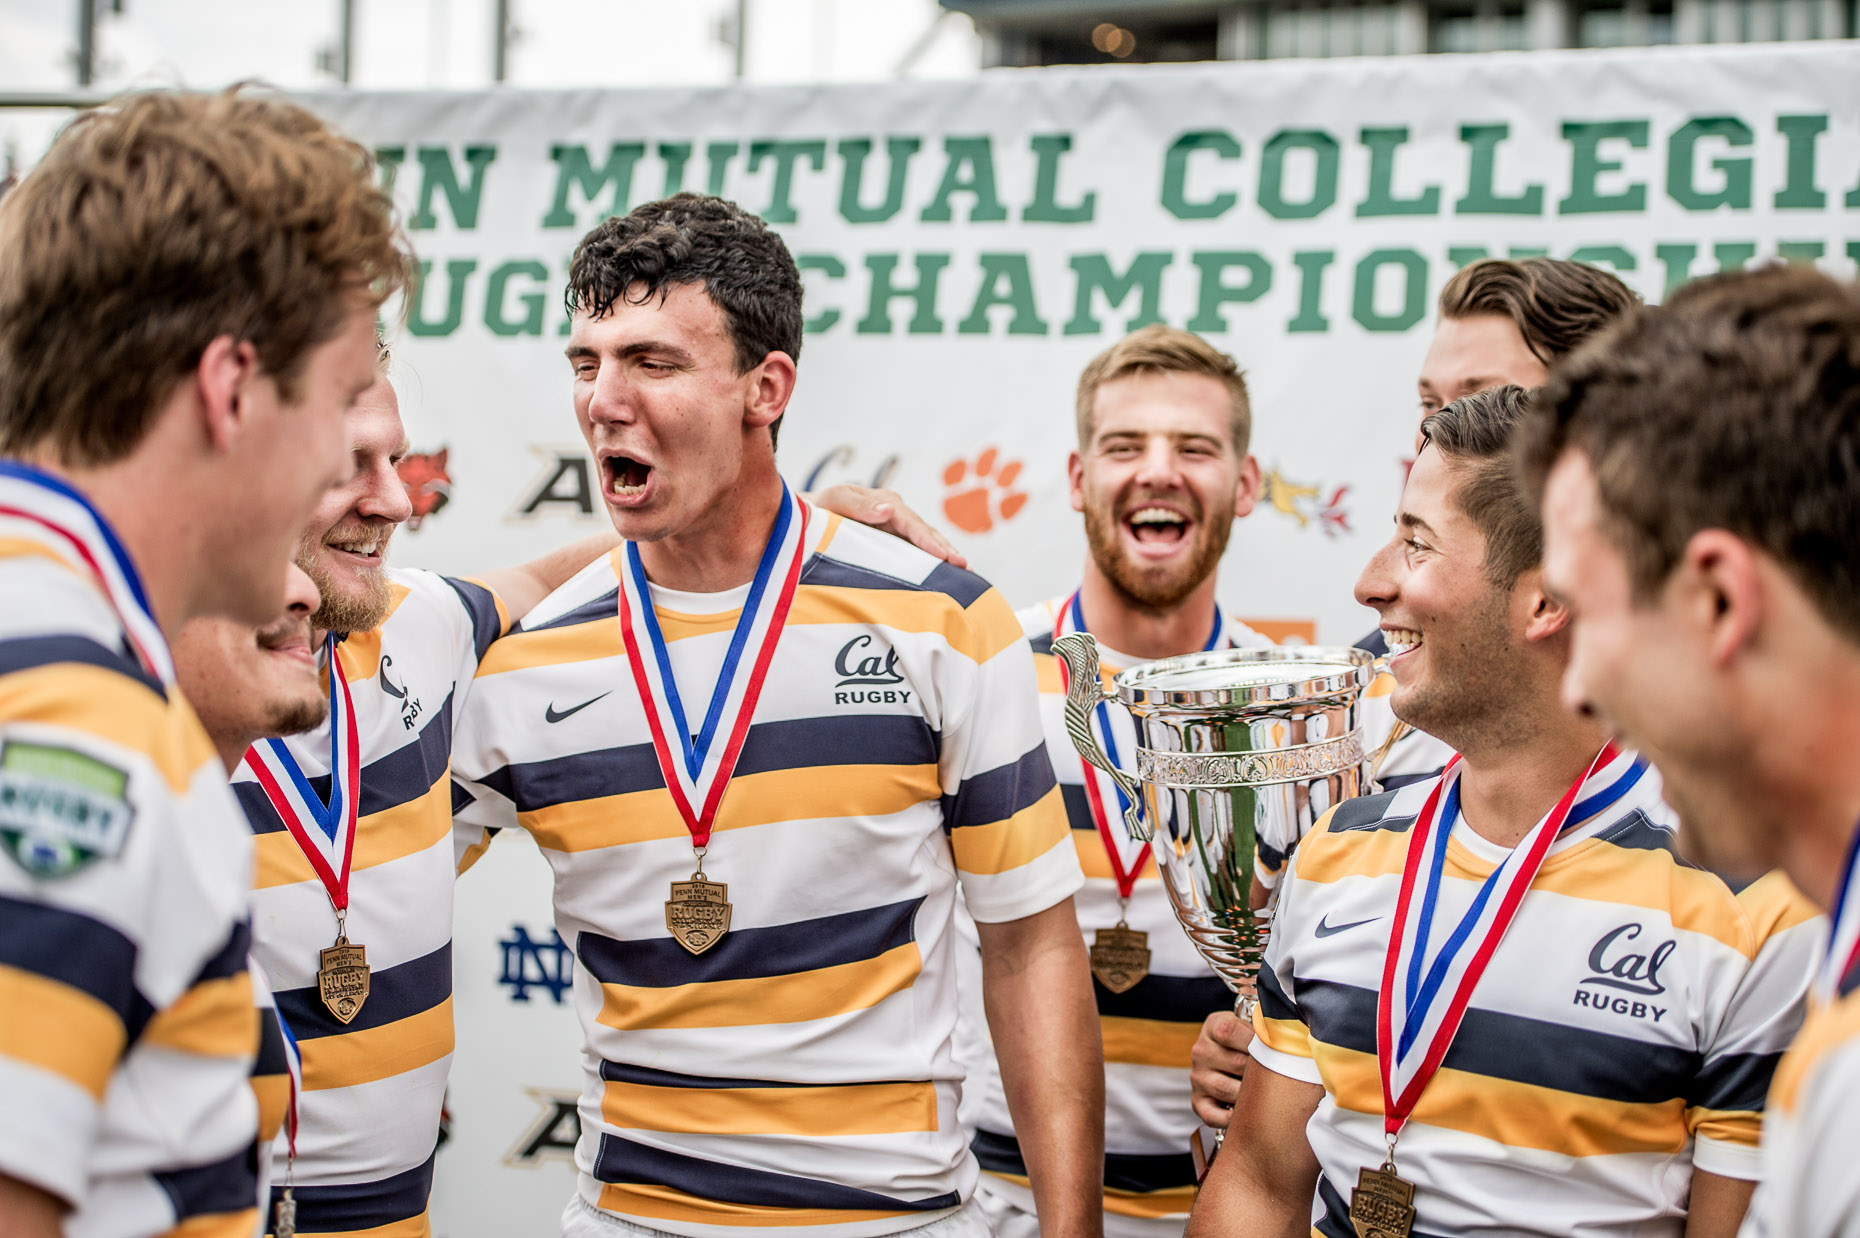 Lifestyle Photographer - Cal Bears win College Rugby Championships